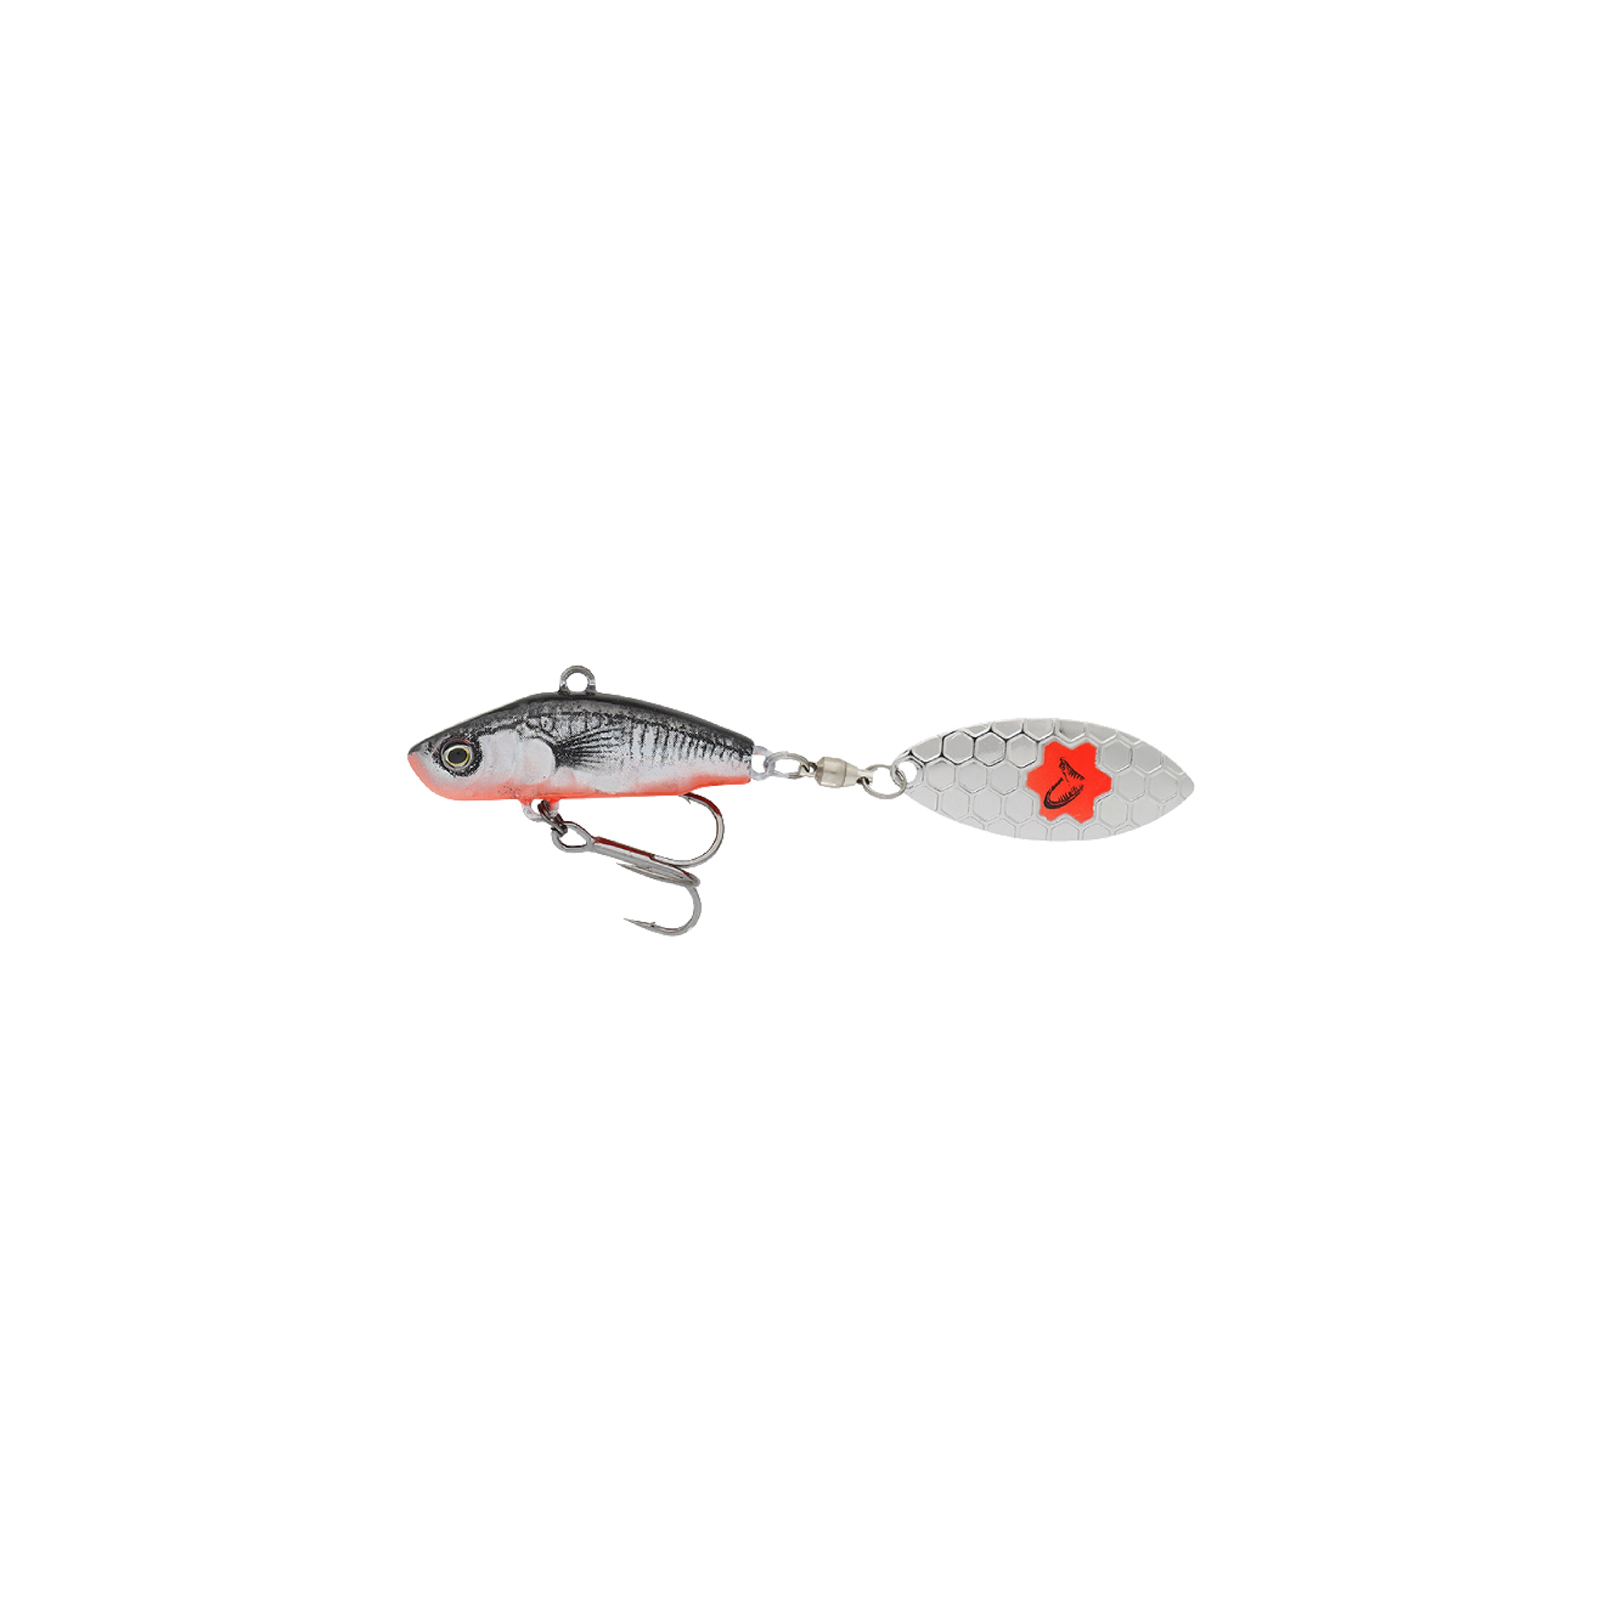 Блешня Savage Gear 3D Sticklebait Tailspin 80mm 18.0g Black Red (1854.44.02)